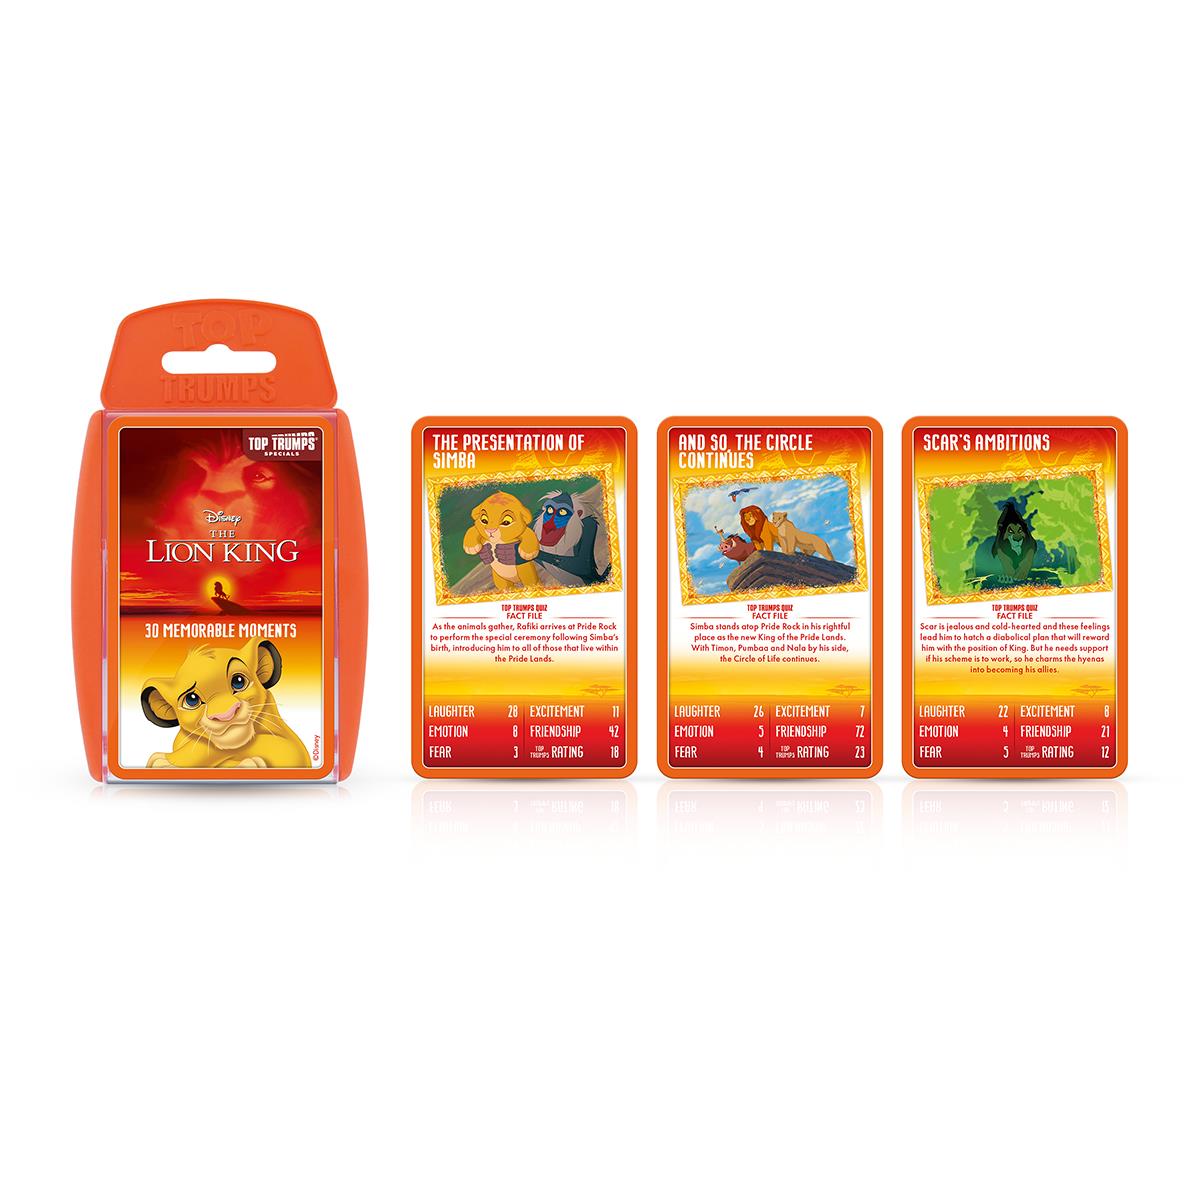 Lion King Top Trumps Card Game